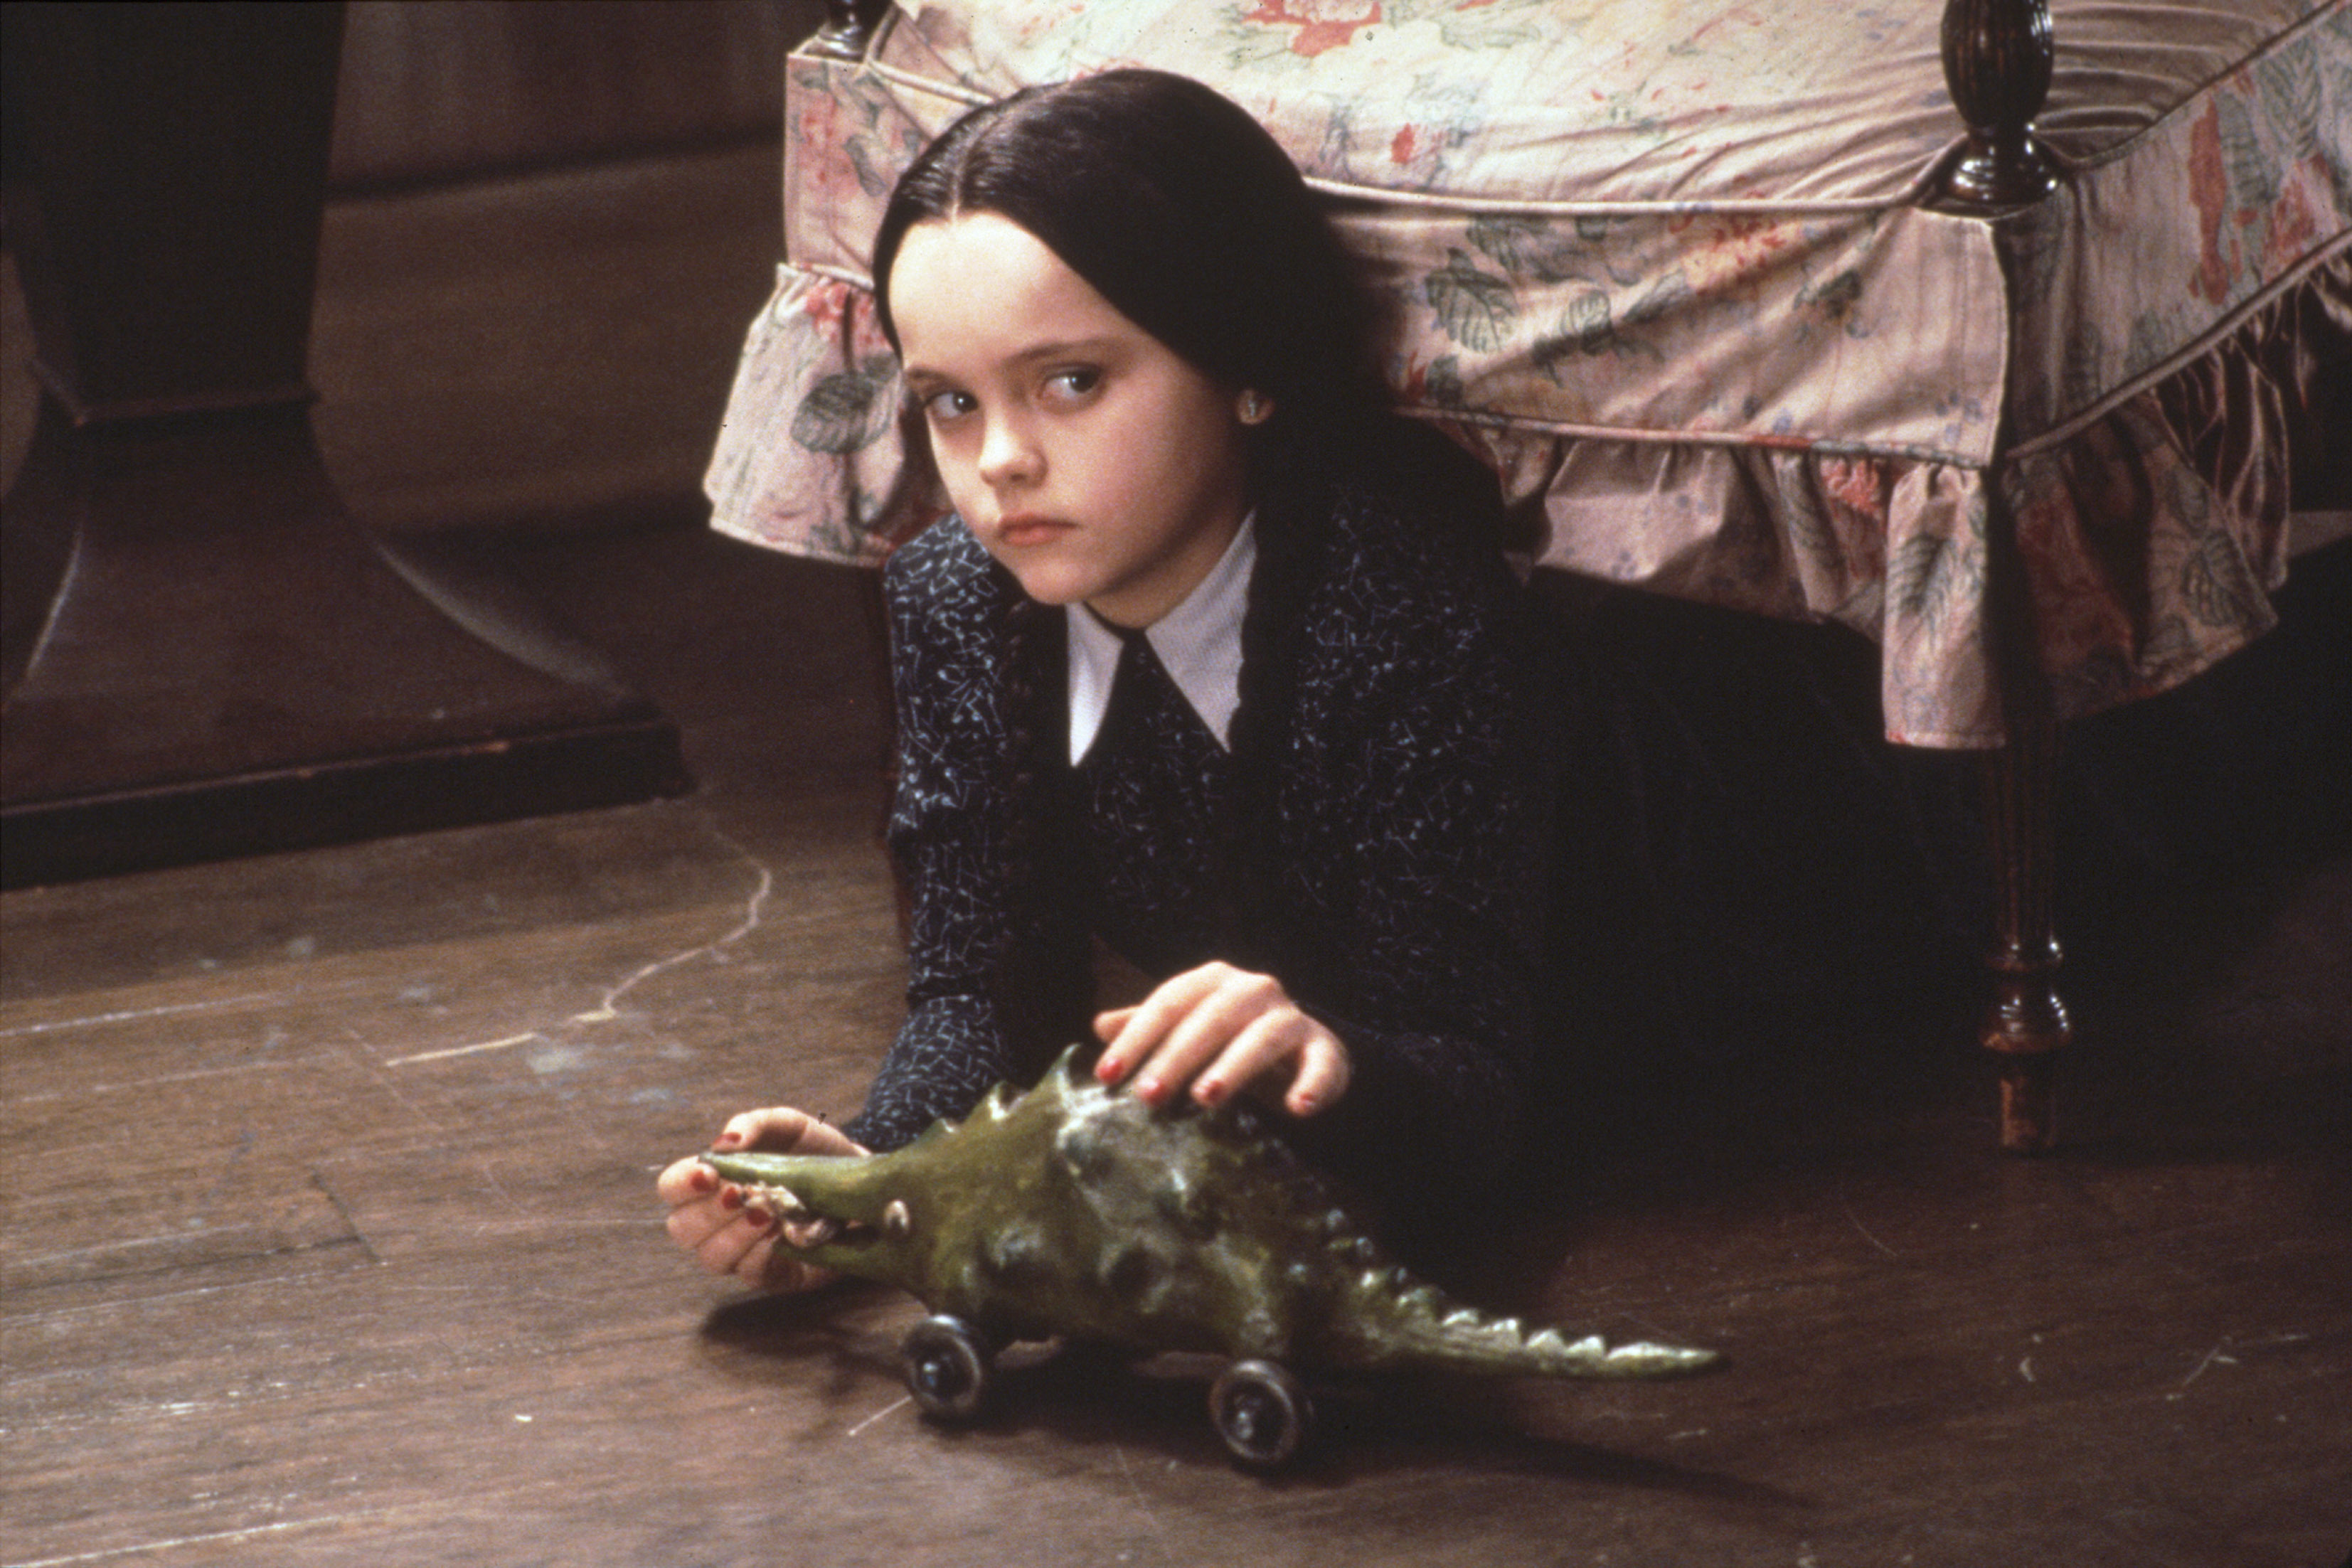 <p><span>Christina Ricci scored her first big role in 1990 playing Cher's daughter in "Mermaids." She went on to star in "The Addams Family," "Casper" and "Now and Then." Her quick rise to fame as a child made her "obnoxious," she would later admit. </span></p><p>MORE: <a href="https://www.wonderwall.com/entertainment/tv/where-are-they-now-90s-heartthrobs-19167.gallery">'90s heartthrobs: Where are they now?</a></p>